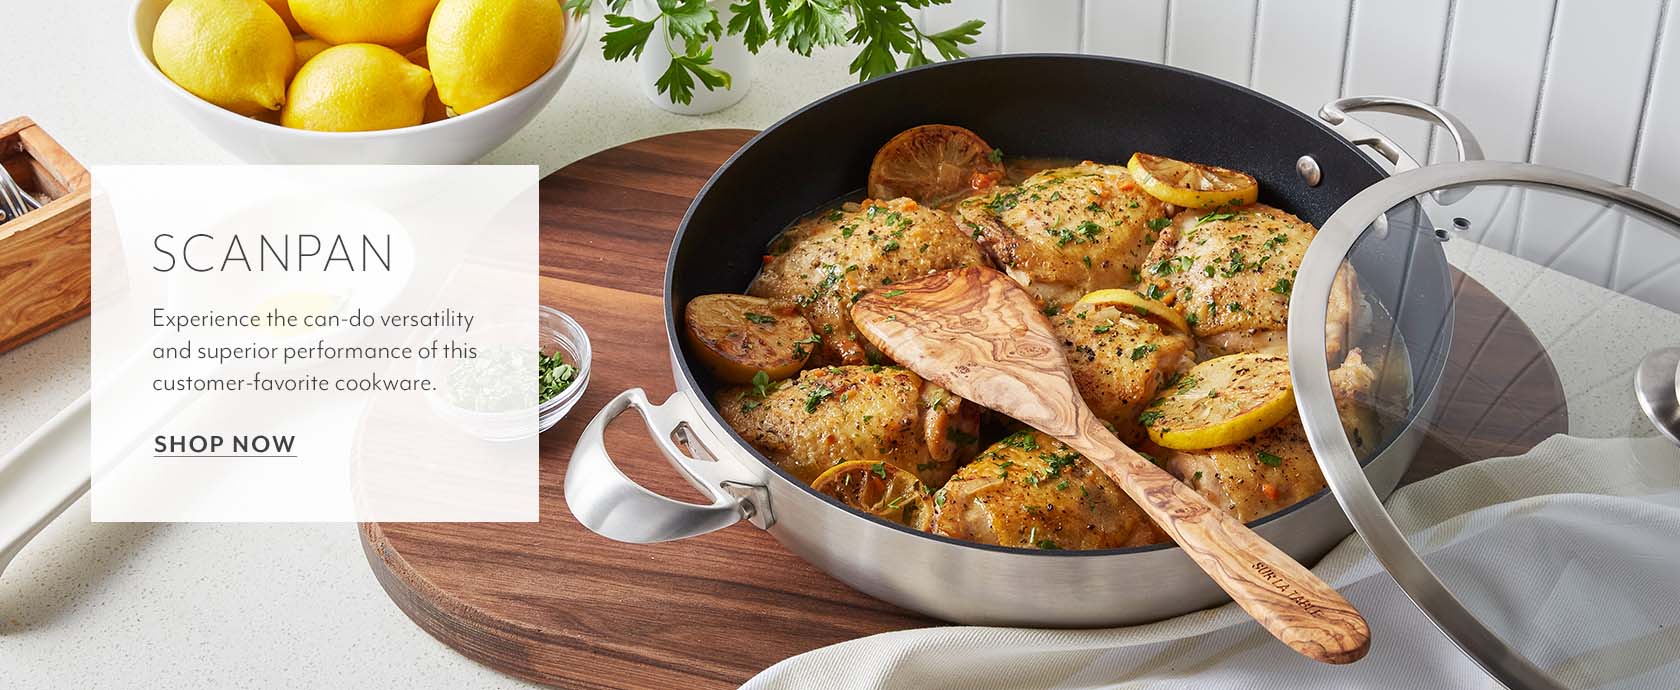 Scanpan. Experience the can-do versatility and superior performance of this customer-favorite cookware. Shop Now.